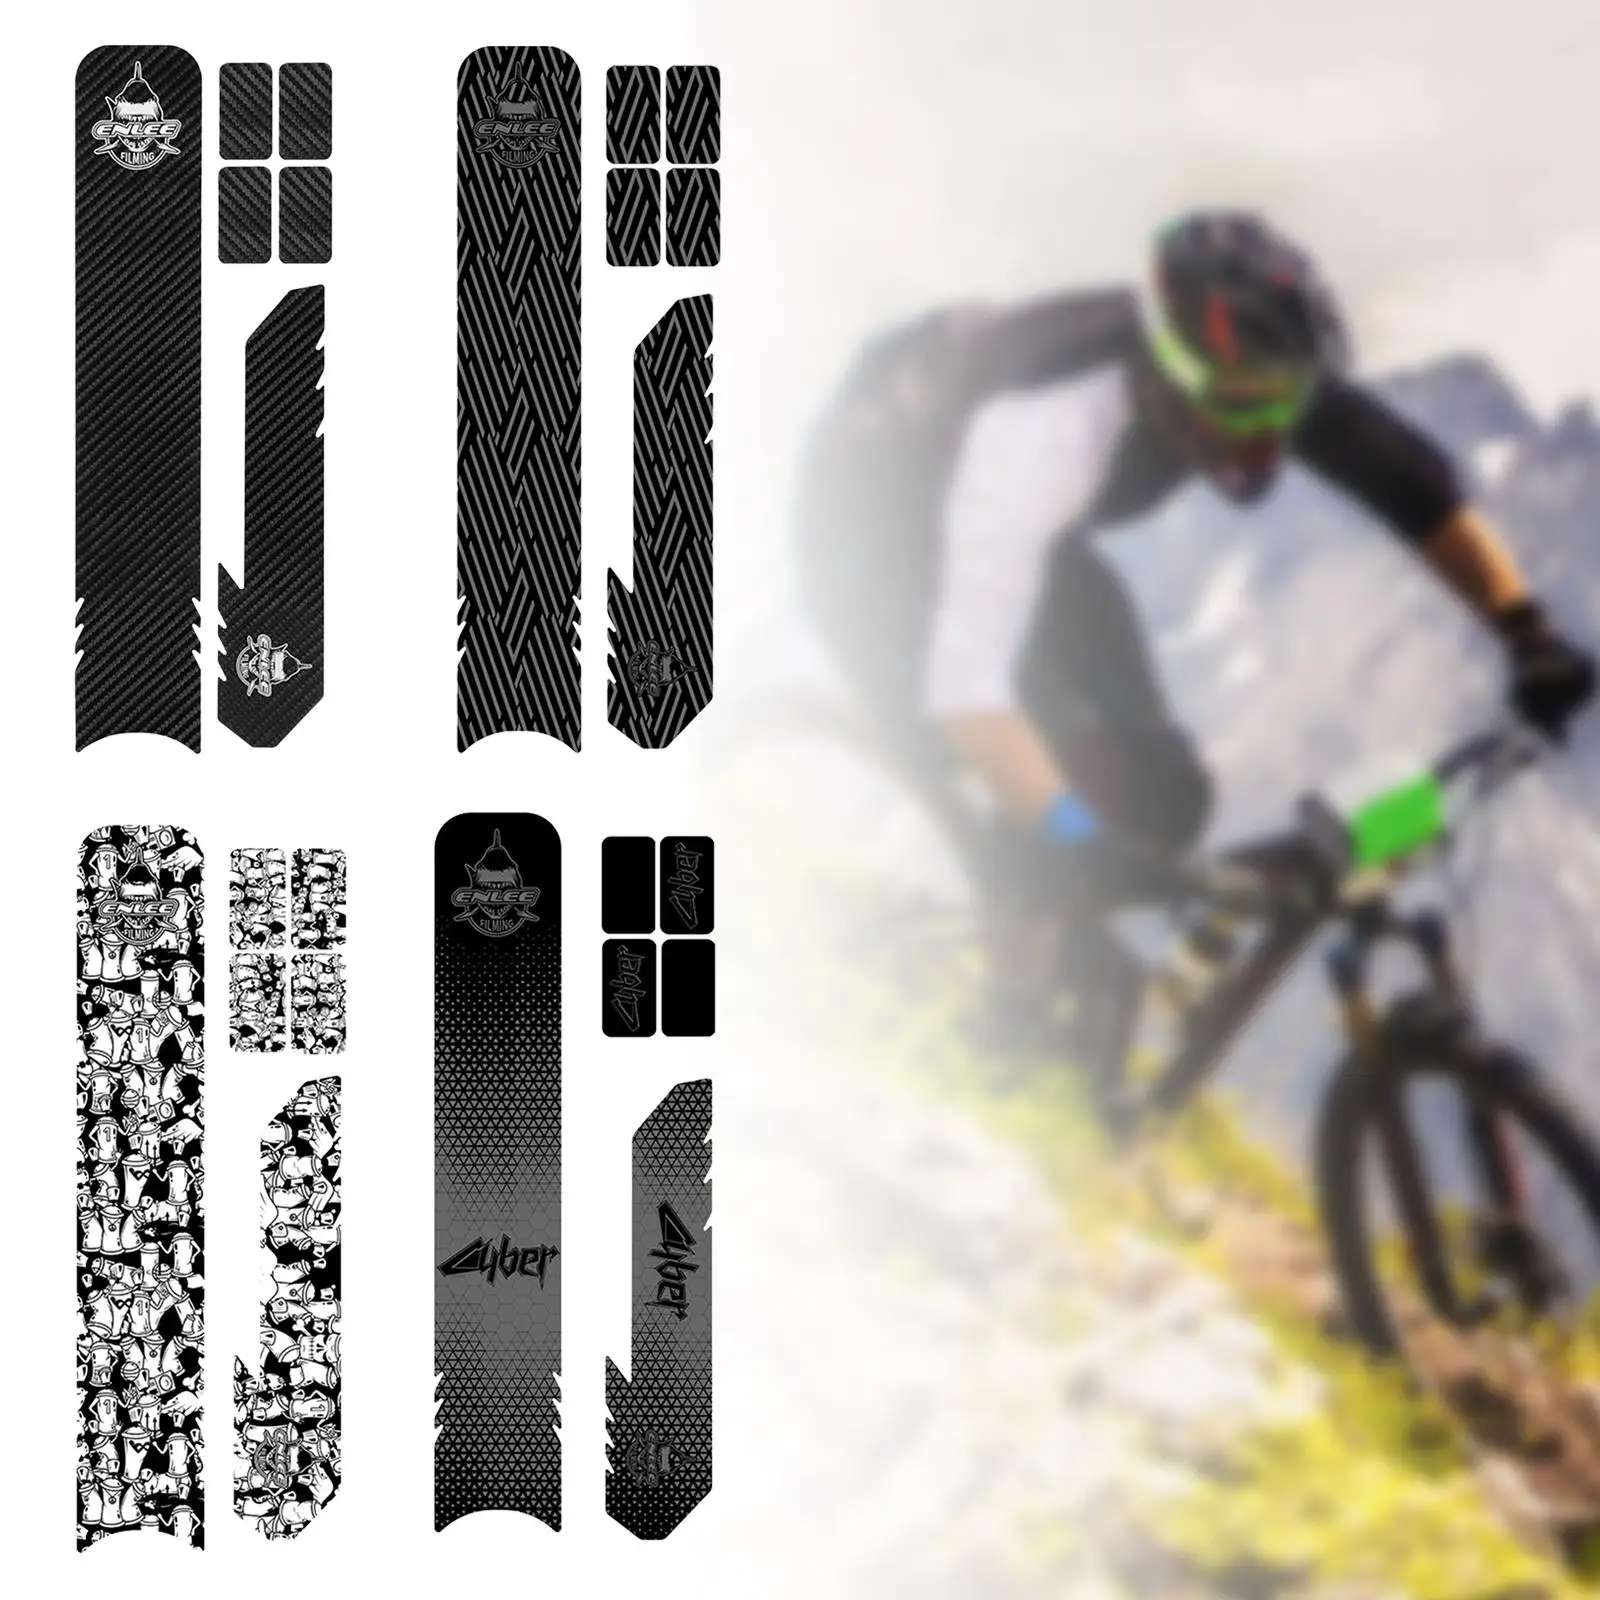 Bike Frame Protection Stickers Chainstay Protector Film for Sports Bikes Mountain Bike